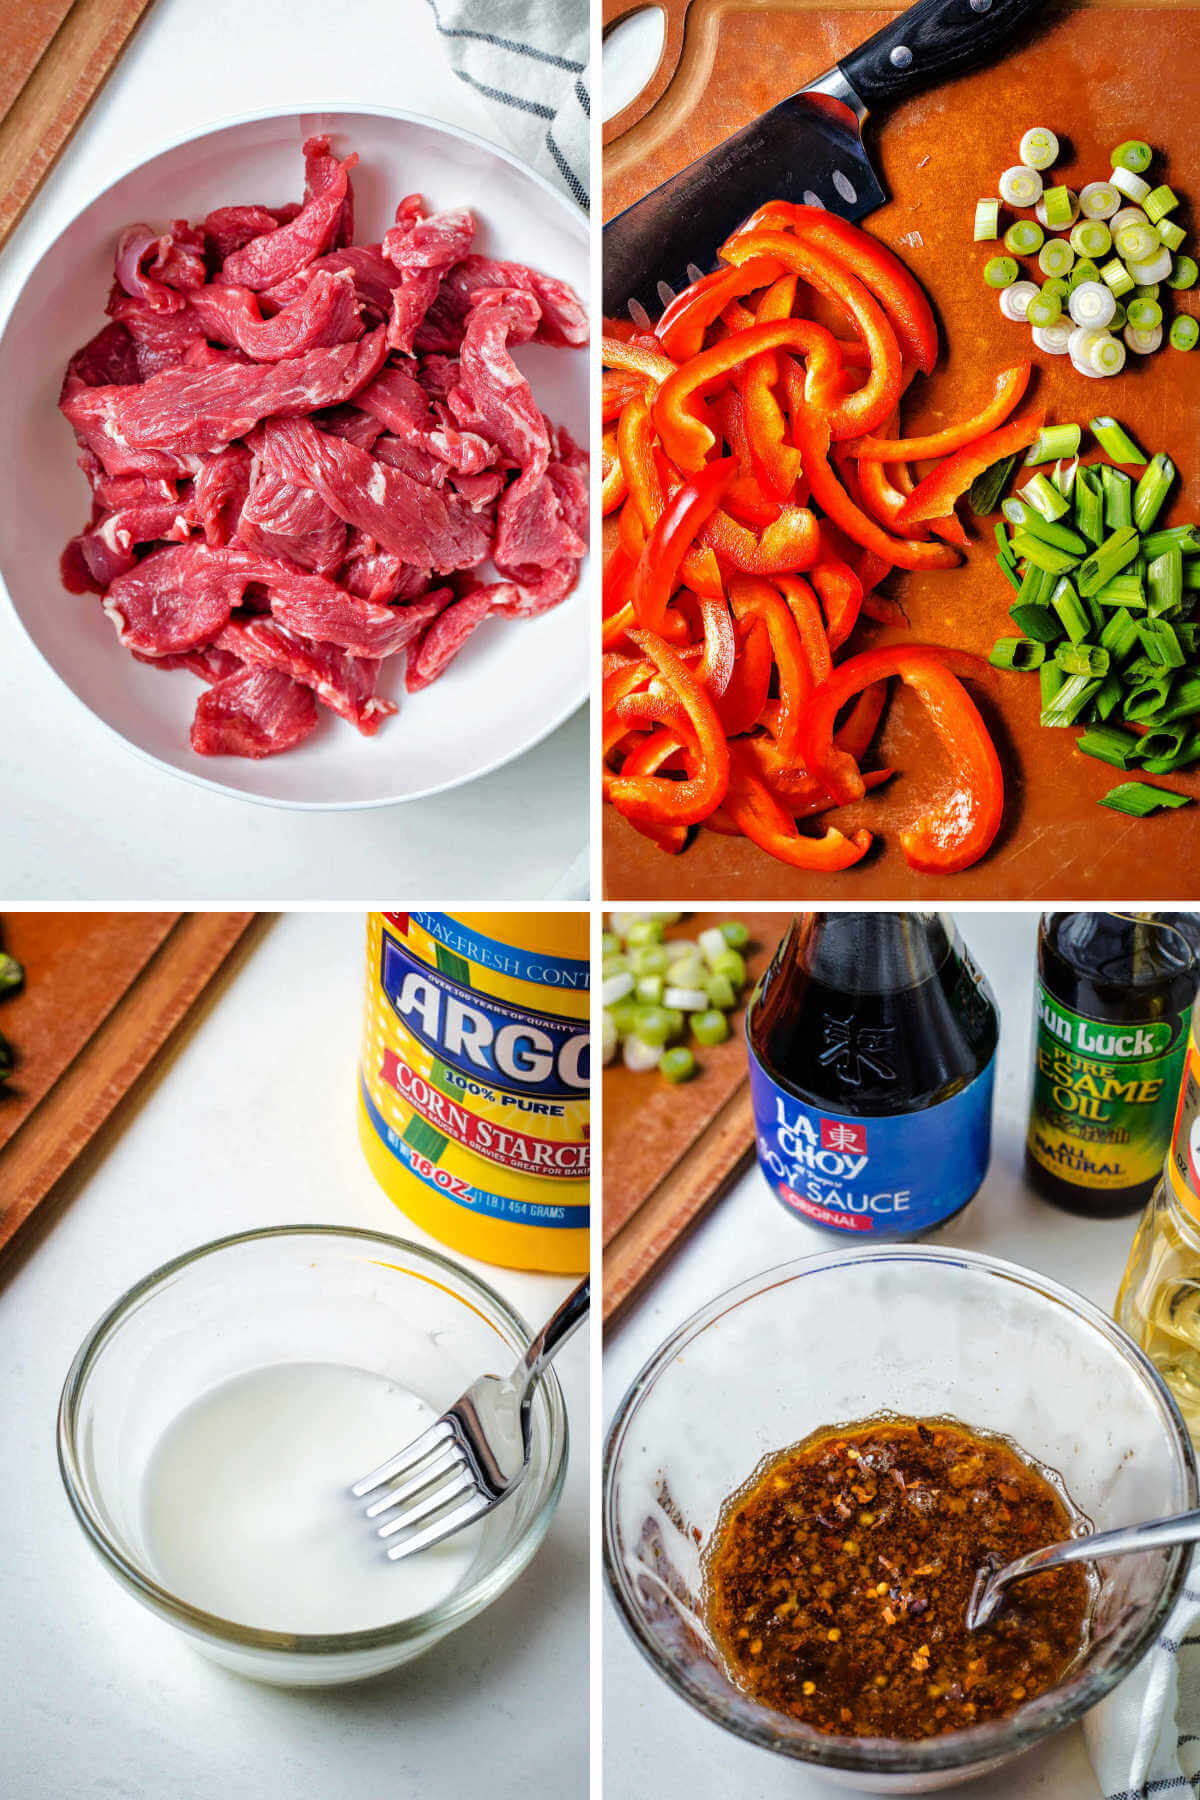 sliced beef and chopped vegetables for stir fry; whisking together the sauce for stir fry in a bowl.